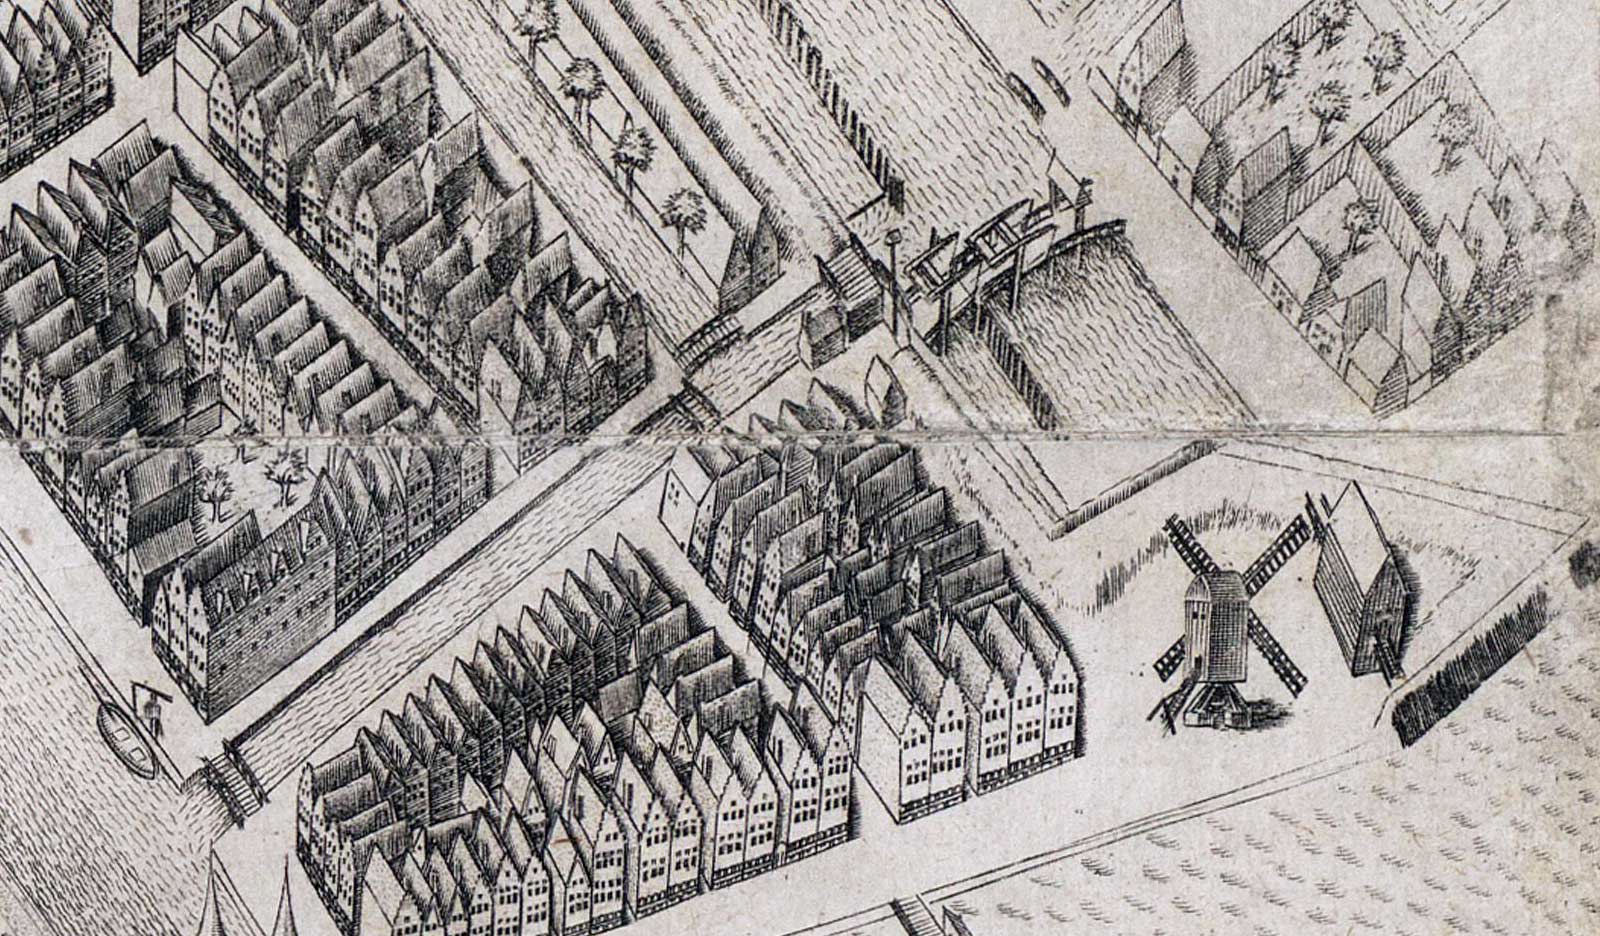 Detail from a map by Pieter Bast, with the 3rd Haarlemmer­poort in Amsterdam, 1597